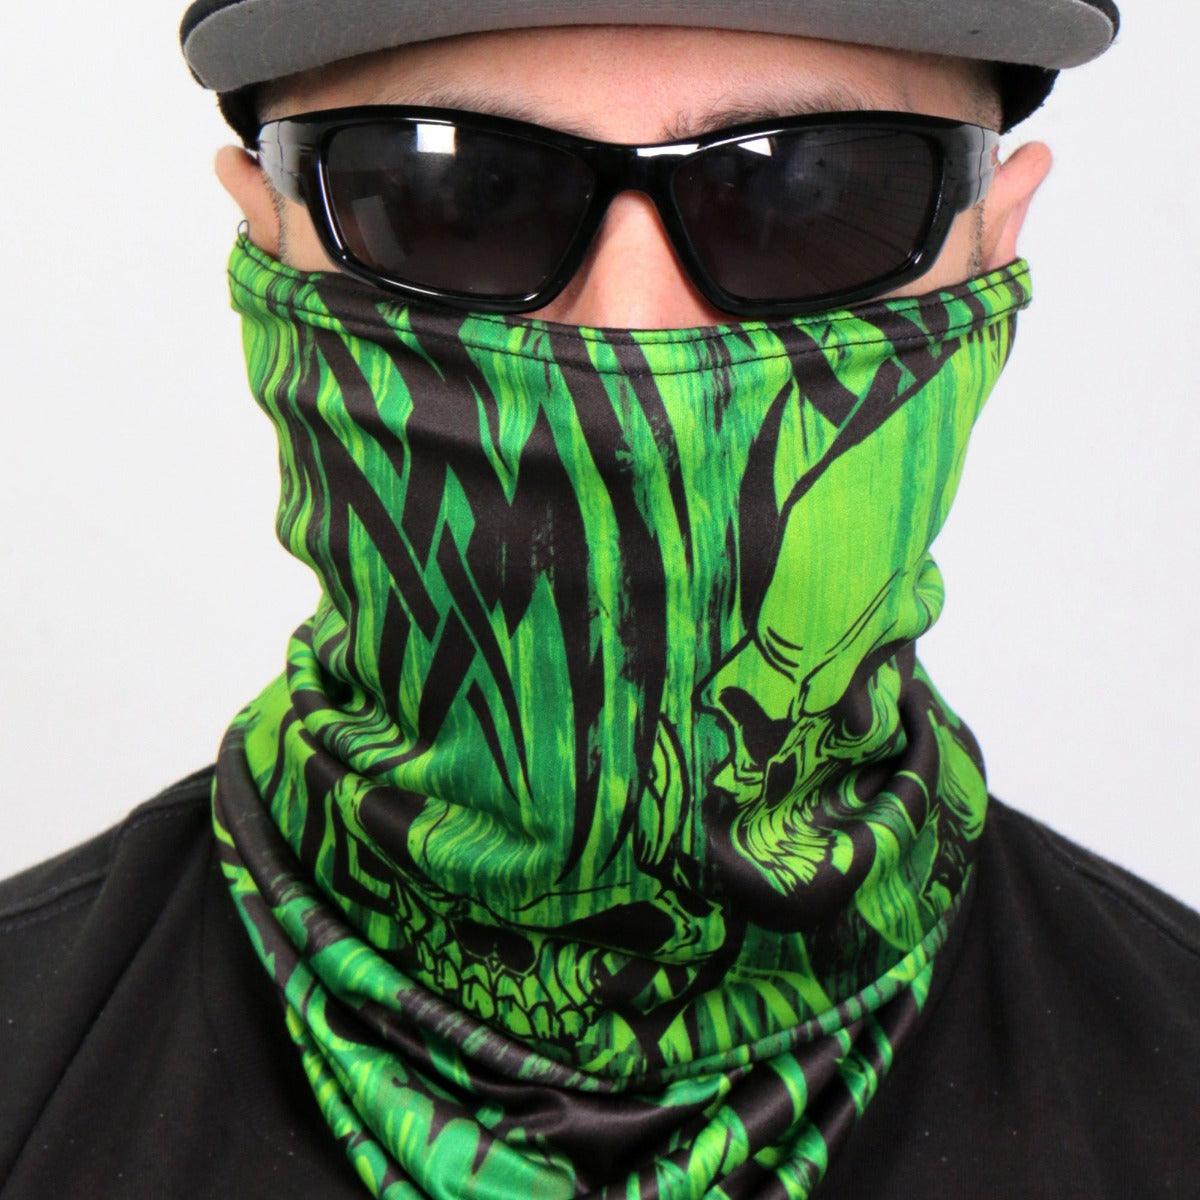 Hot Leathers Over The Top Skulls Neck Gaiter - American Legend Rider